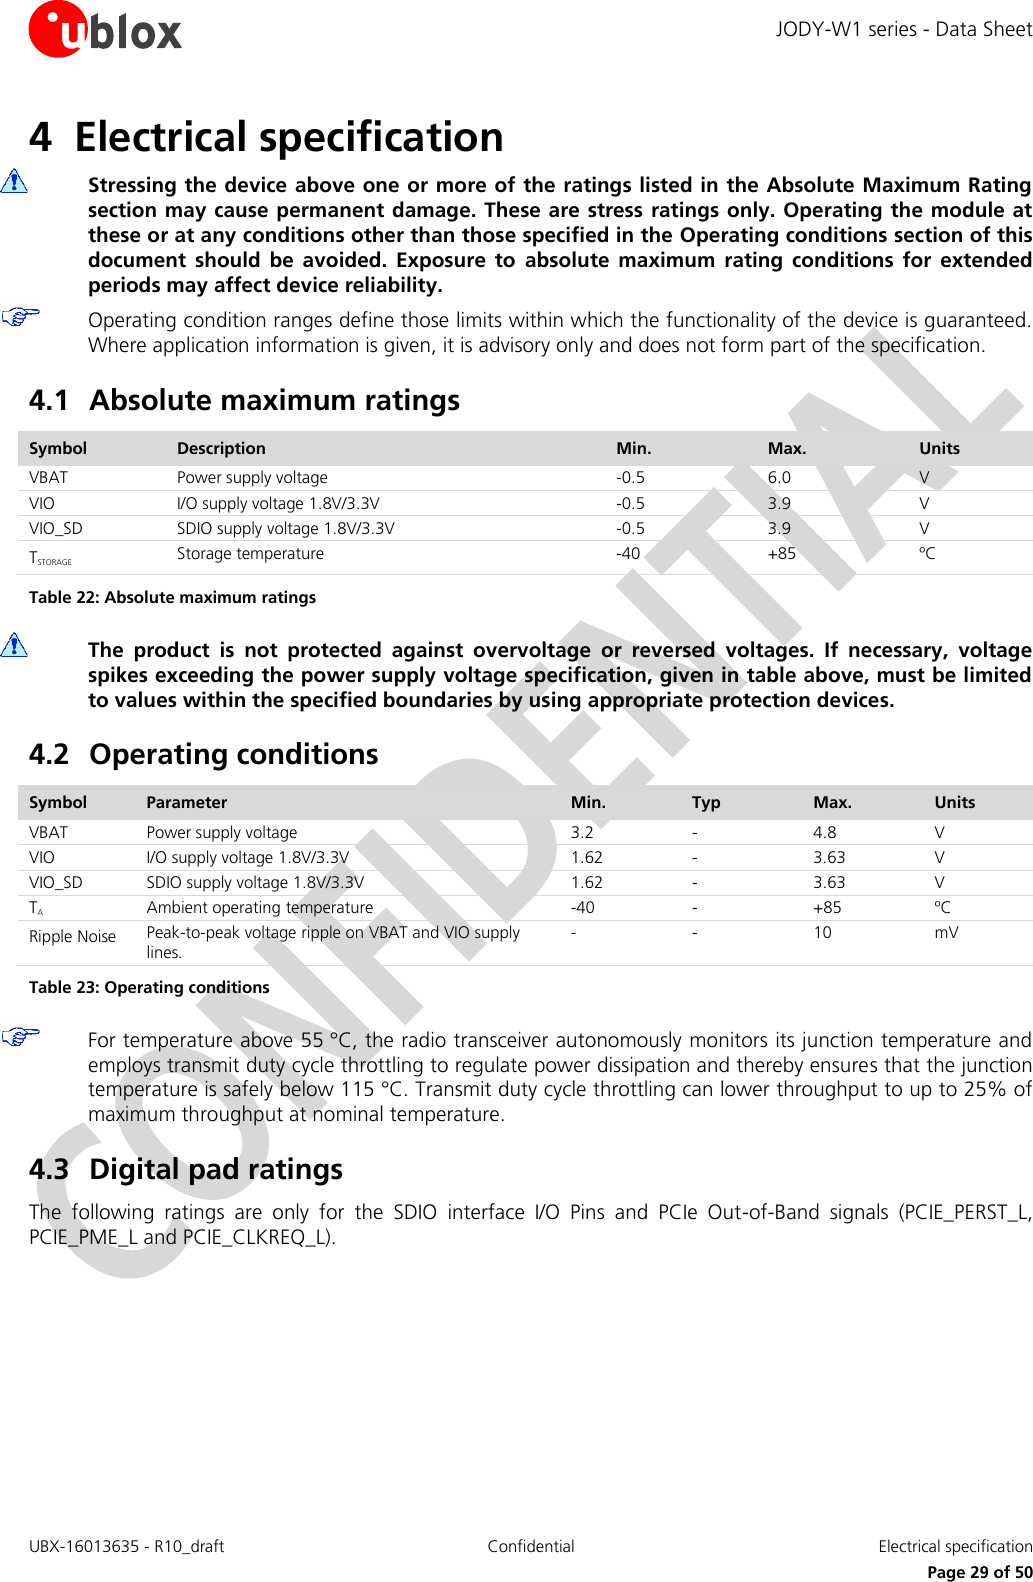 JODY-W1 series - Data Sheet UBX-16013635 - R10_draft Confidential  Electrical specification     Page 29 of 50 4 Electrical specification  Stressing the device above one or more of the ratings listed in the Absolute Maximum Rating section may cause permanent damage. These are stress ratings only. Operating the module at these or at any conditions other than those specified in the Operating conditions section of this document  should  be  avoided.  Exposure  to  absolute  maximum  rating  conditions  for  extended periods may affect device reliability.  Operating condition ranges define those limits within which the functionality of the device is guaranteed. Where application information is given, it is advisory only and does not form part of the specification. 4.1 Absolute maximum ratings Symbol Description Min.  Max. Units VBAT Power supply voltage  -0.5 6.0 V VIO I/O supply voltage 1.8V/3.3V -0.5 3.9 V VIO_SD SDIO supply voltage 1.8V/3.3V -0.5 3.9 V TSTORAGE Storage temperature -40 +85 ºC Table 22: Absolute maximum ratings  The  product  is  not  protected  against  overvoltage  or  reversed  voltages.  If  necessary,  voltage spikes exceeding the power supply voltage specification, given in table above, must be limited to values within the specified boundaries by using appropriate protection devices. 4.2 Operating conditions Symbol Parameter Min.  Typ Max. Units VBAT Power supply voltage  3.2 - 4.8 V VIO I/O supply voltage 1.8V/3.3V 1.62 - 3.63 V VIO_SD SDIO supply voltage 1.8V/3.3V 1.62 - 3.63 V TA Ambient operating temperature -40 - +85 ºC Ripple Noise Peak-to-peak voltage ripple on VBAT and VIO supply lines. - - 10 mV Table 23: Operating conditions  For temperature above 55 °C, the radio transceiver autonomously monitors its junction temperature and employs transmit duty cycle throttling to regulate power dissipation and thereby ensures that the junction temperature is safely below 115 °C. Transmit duty cycle throttling can lower throughput to up to 25% of maximum throughput at nominal temperature. 4.3 Digital pad ratings The  following  ratings  are  only  for  the  SDIO  interface  I/O  Pins  and  PCIe  Out-of-Band  signals  (PCIE_PERST_L, PCIE_PME_L and PCIE_CLKREQ_L). 